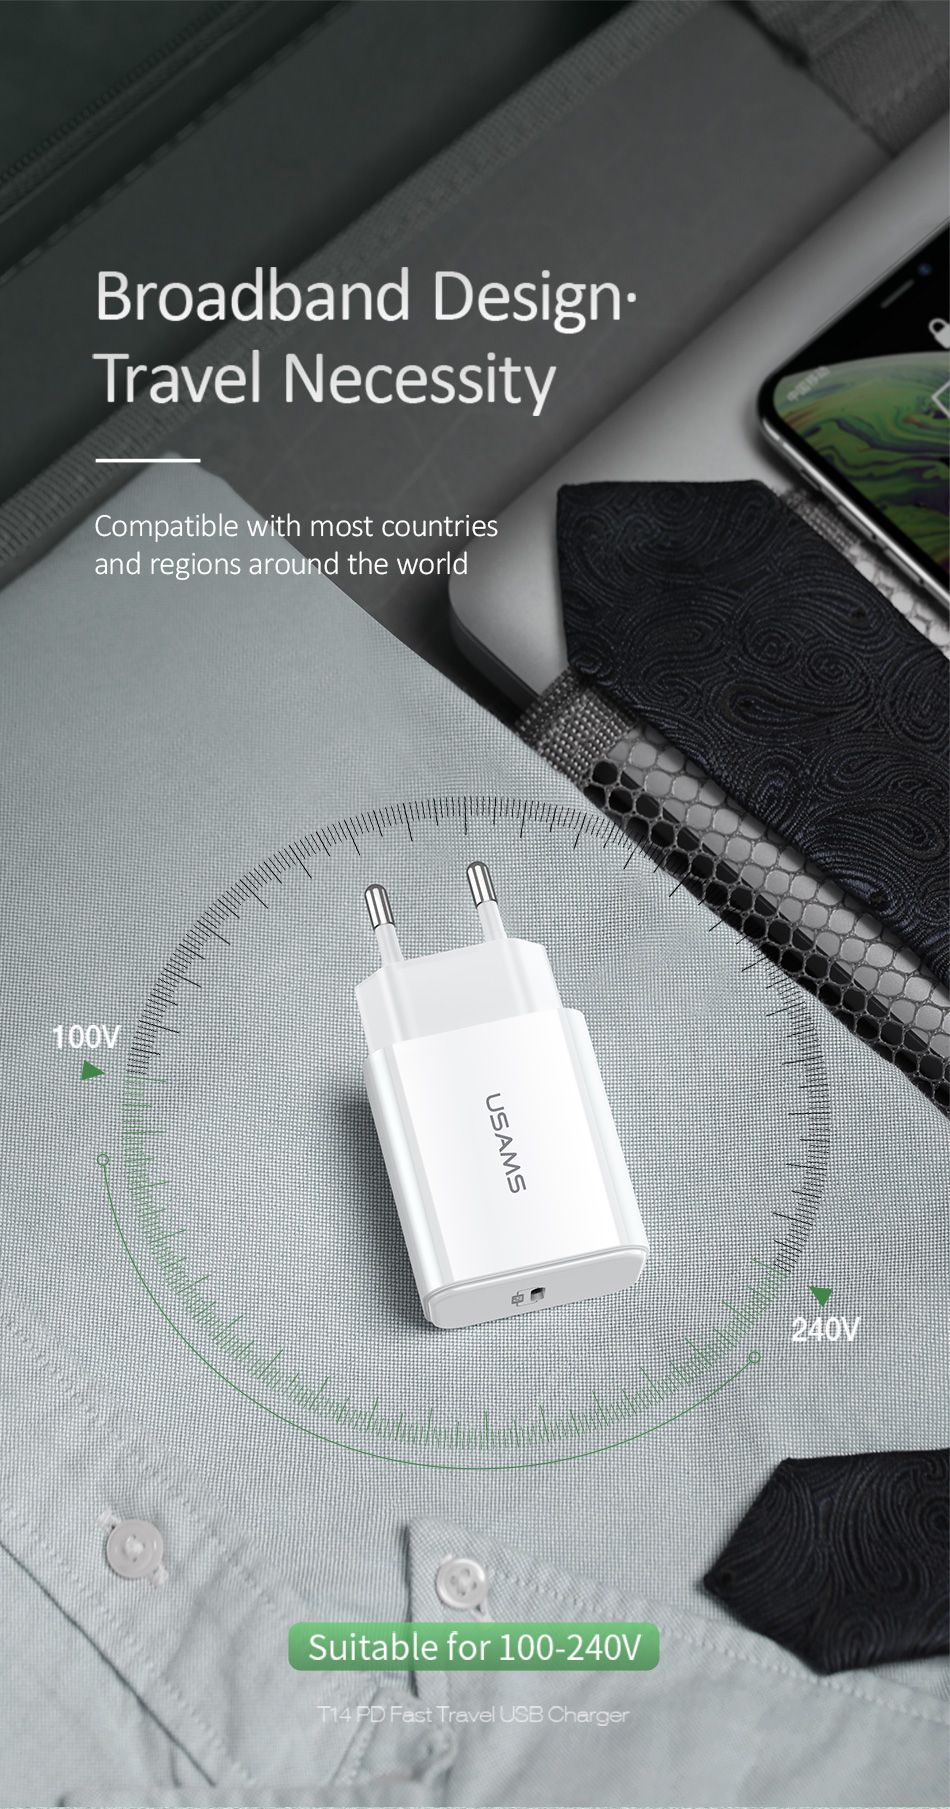 USAMS-18W-PD-Type-C-Fast-Charing-USB-Charger-Adapter-For-iPhone-X-XS-XR-HUAWEI-S10-S10-VIVO-OPPO-1550254